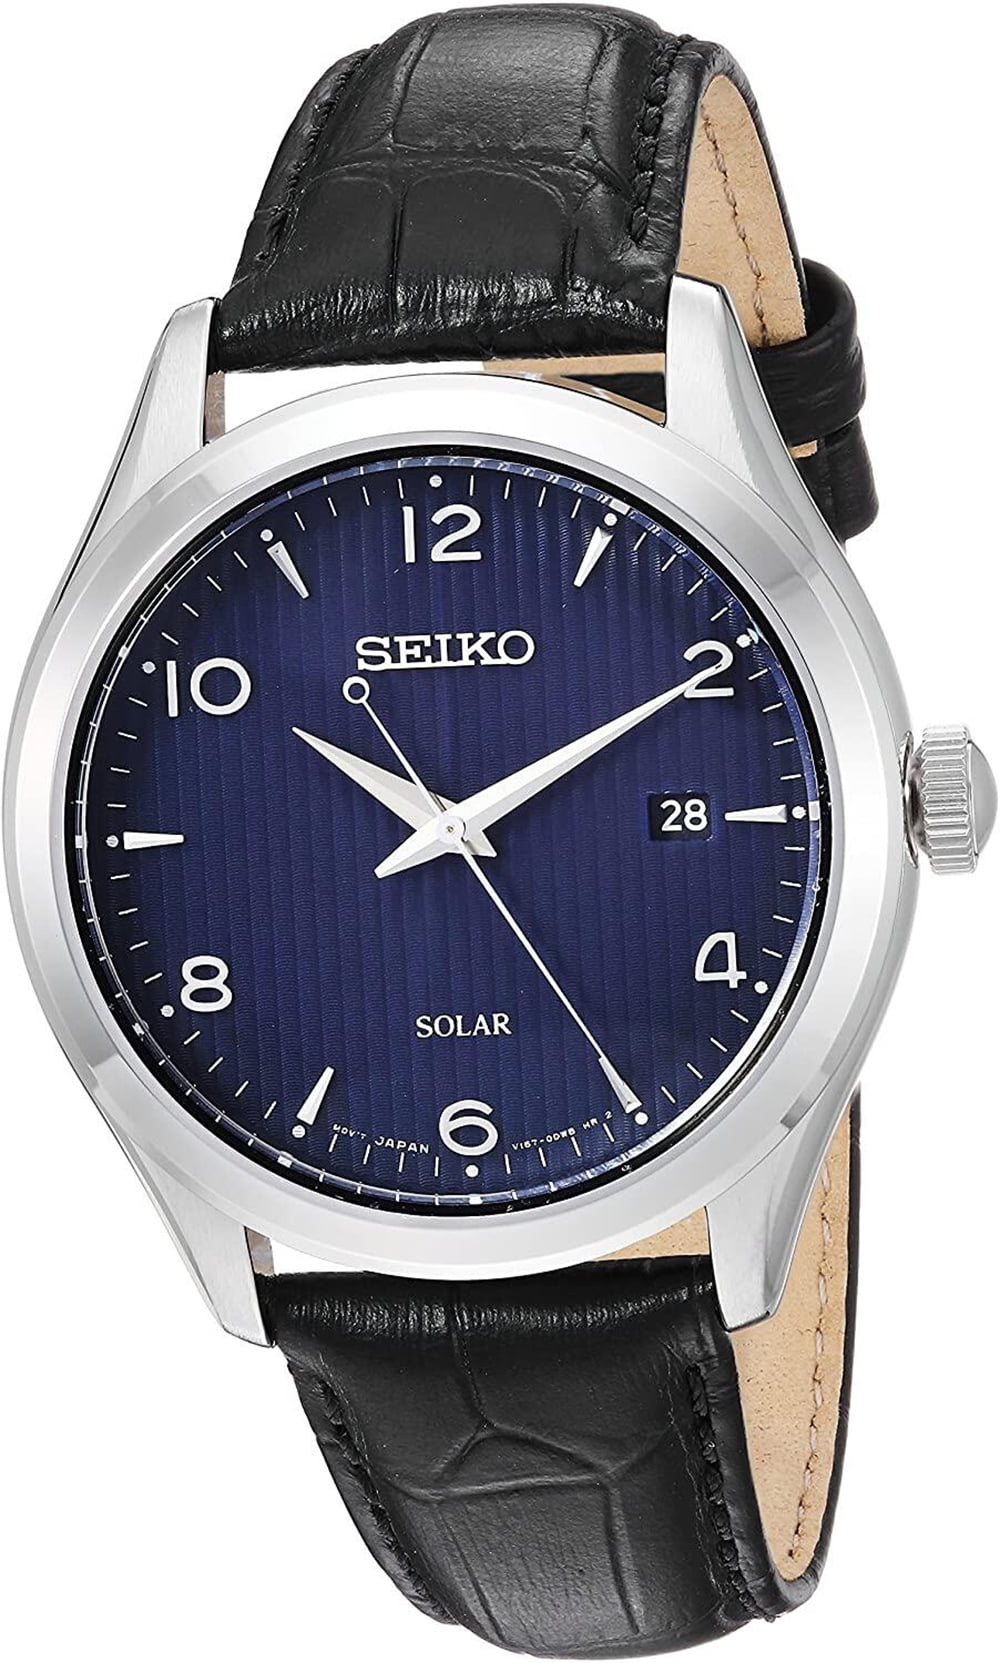 Seiko Men's ' Quartz Stainless Steel and Leather Dress Watch, Color:Black  (Model: SNE491) 